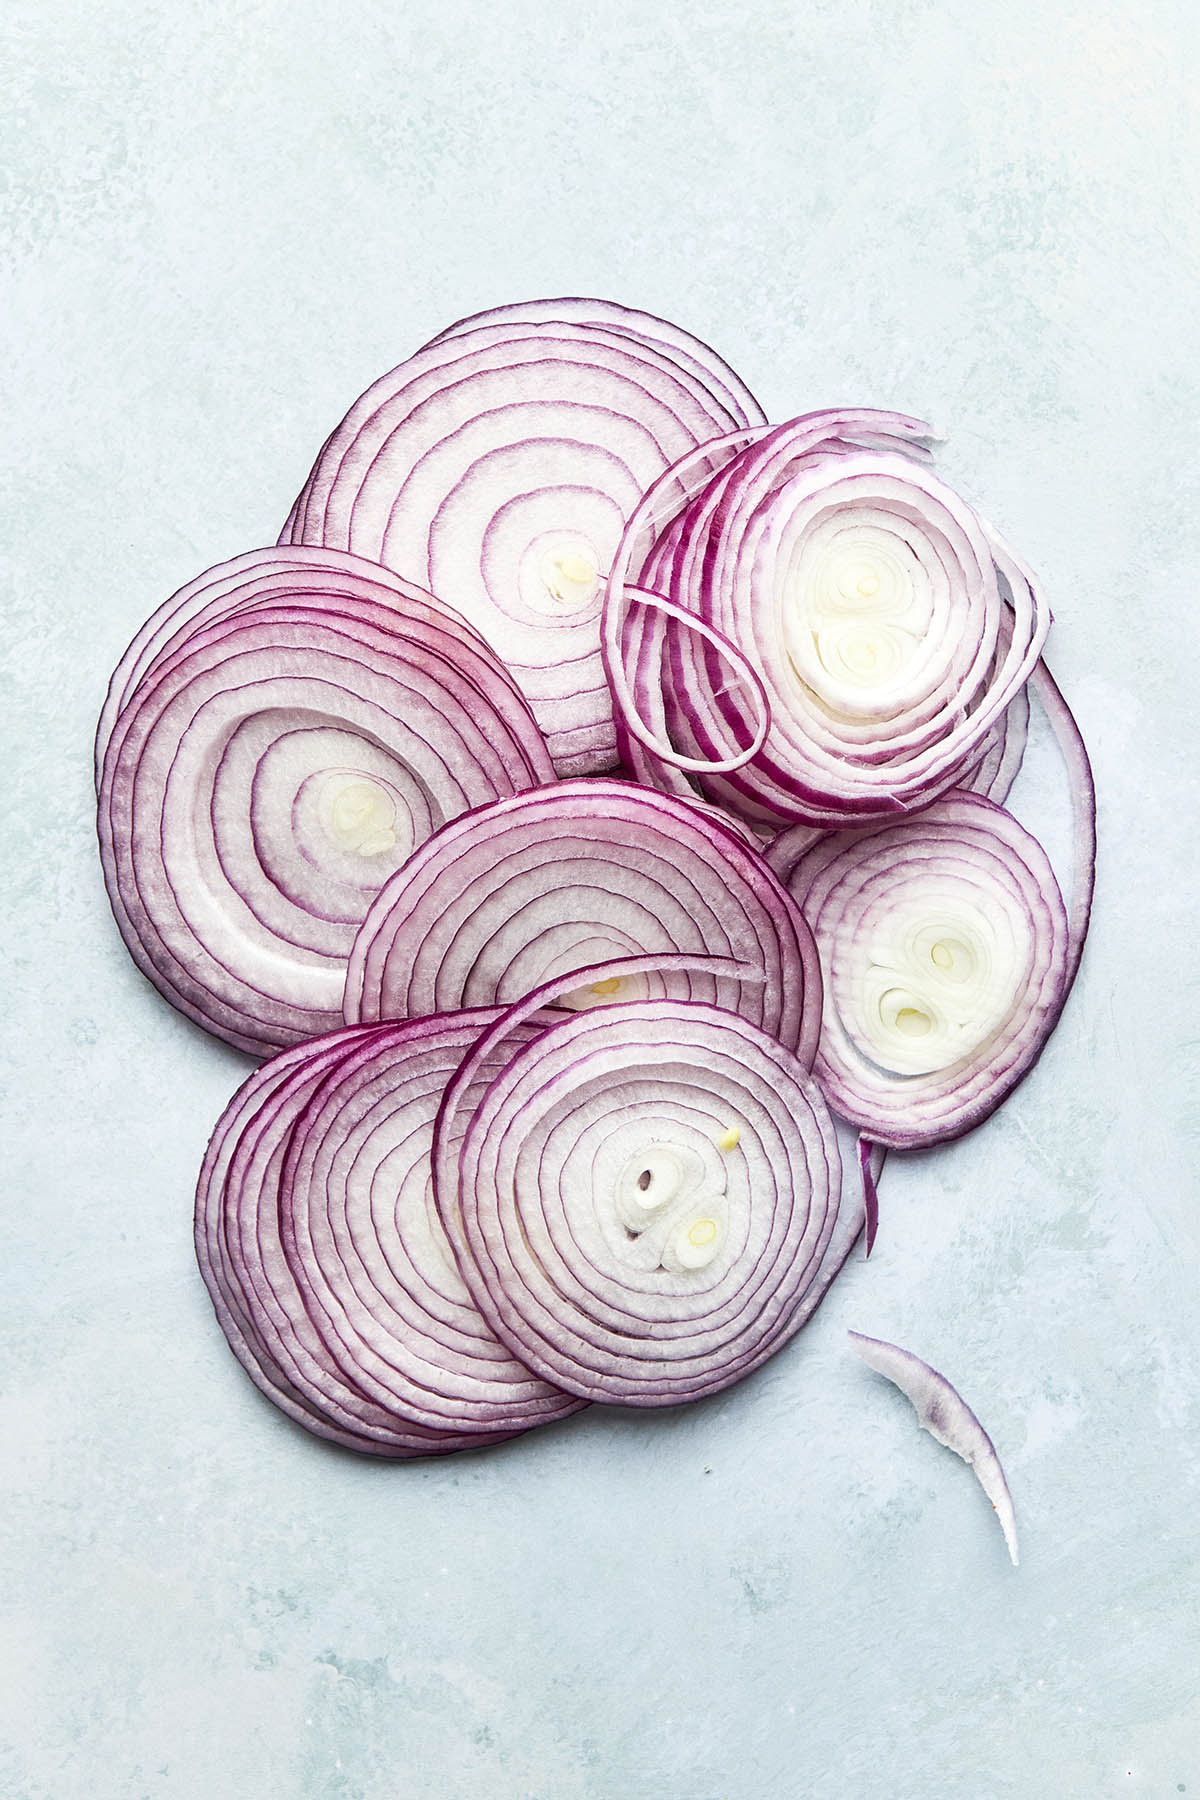 A pile of thinly sliced red onions.